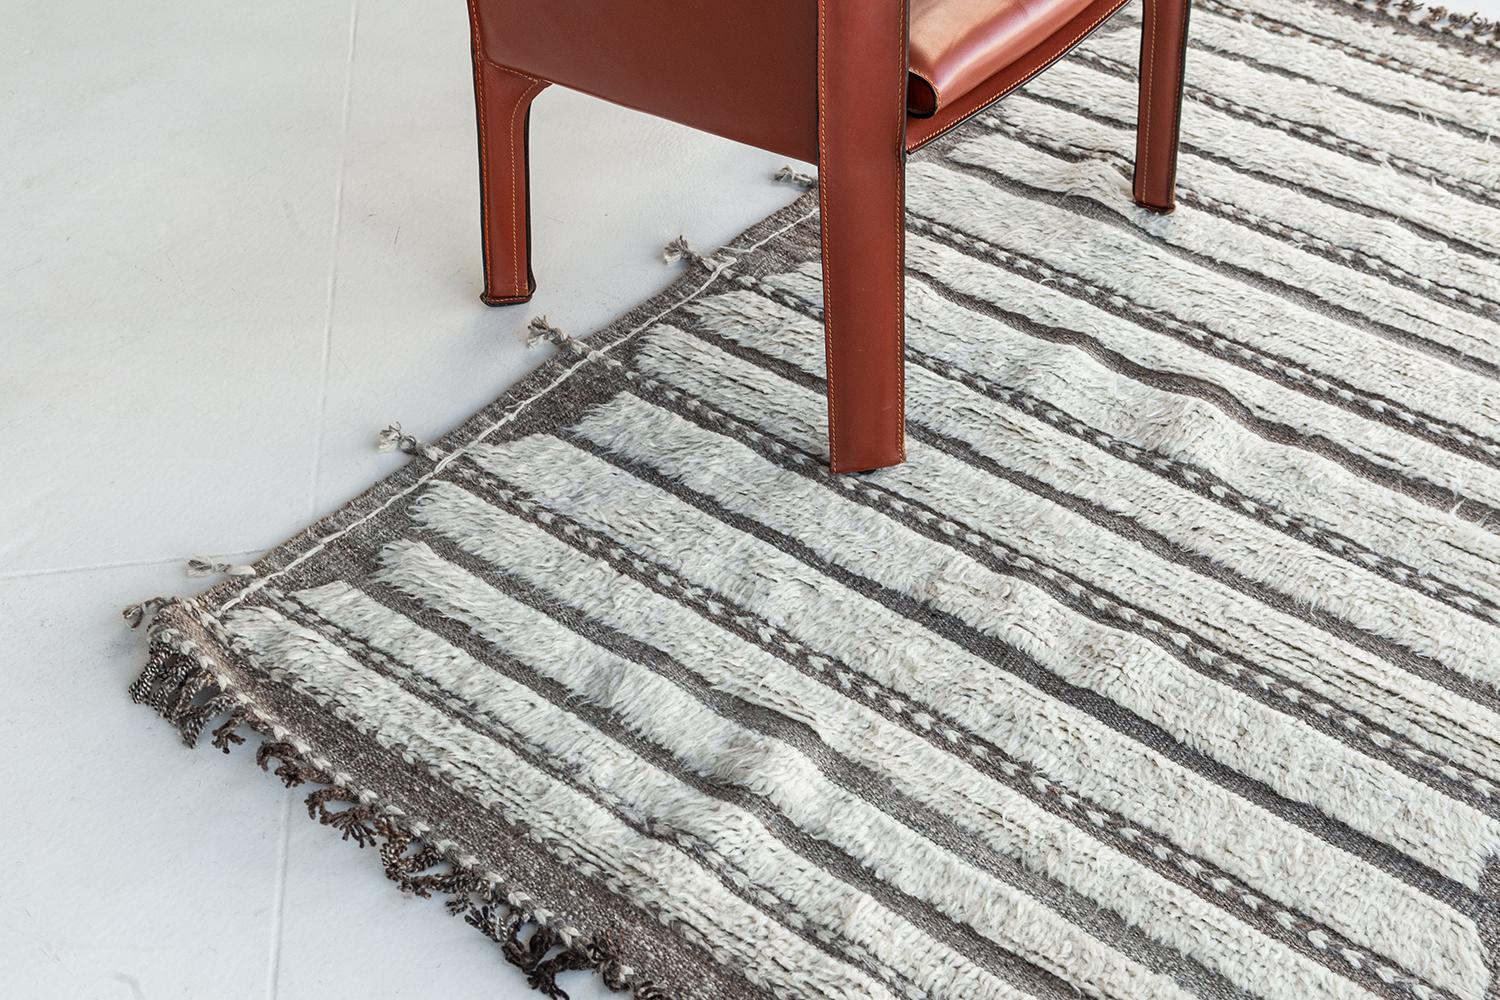 Abrolhos' is a handwoven luxurious wool rug with timeless embossed detailing. In addition to its perfect ivory flat weave, Albrohos has a beautiful shag that brings a lustrous texture and contemporary feel to one's space. The Haute Bohemian